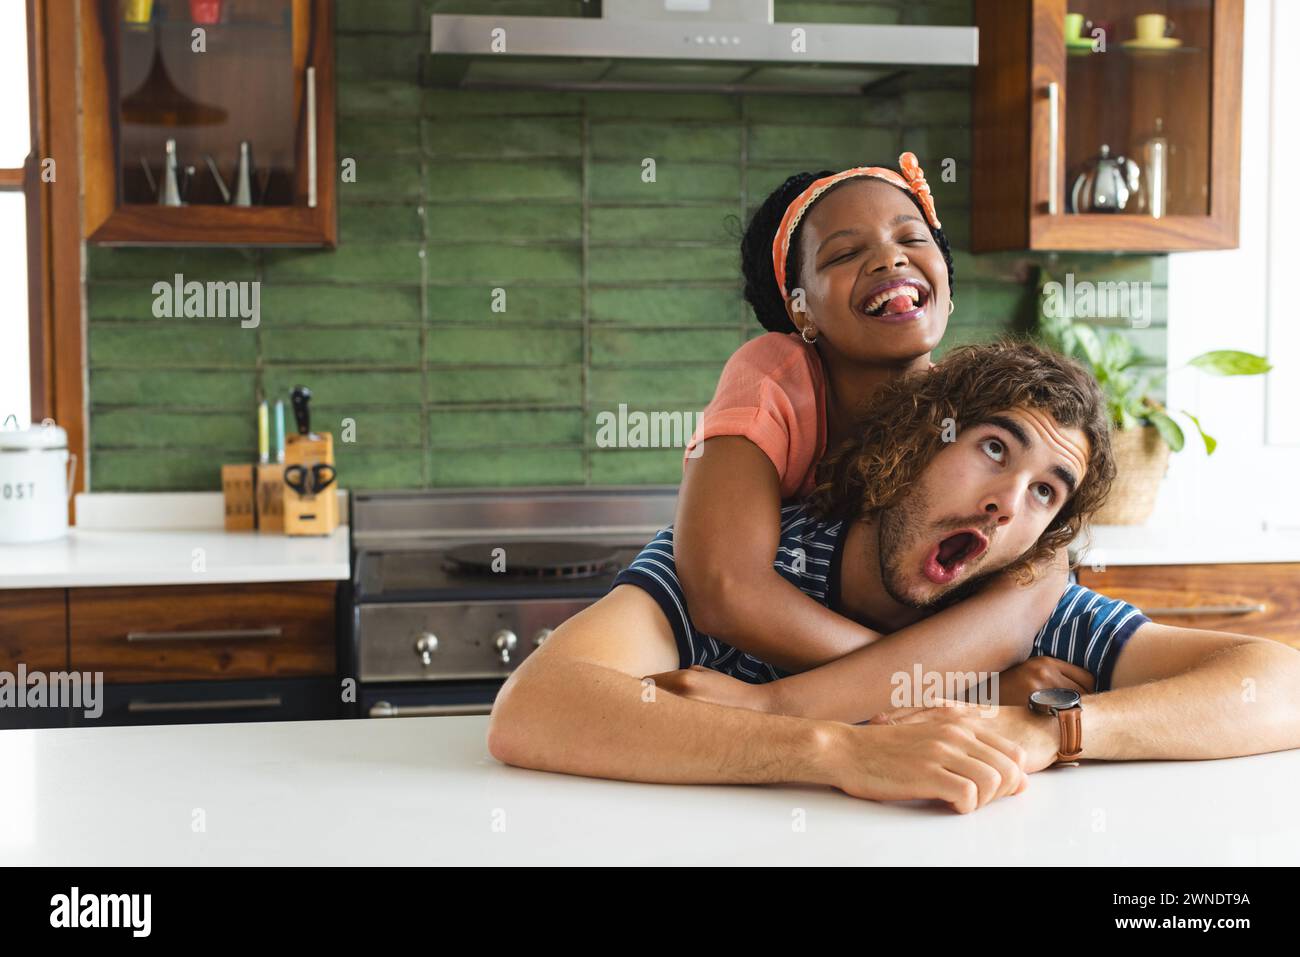 Joyful diverse couple shares a laugh in a bright kitchen. Stock Photo